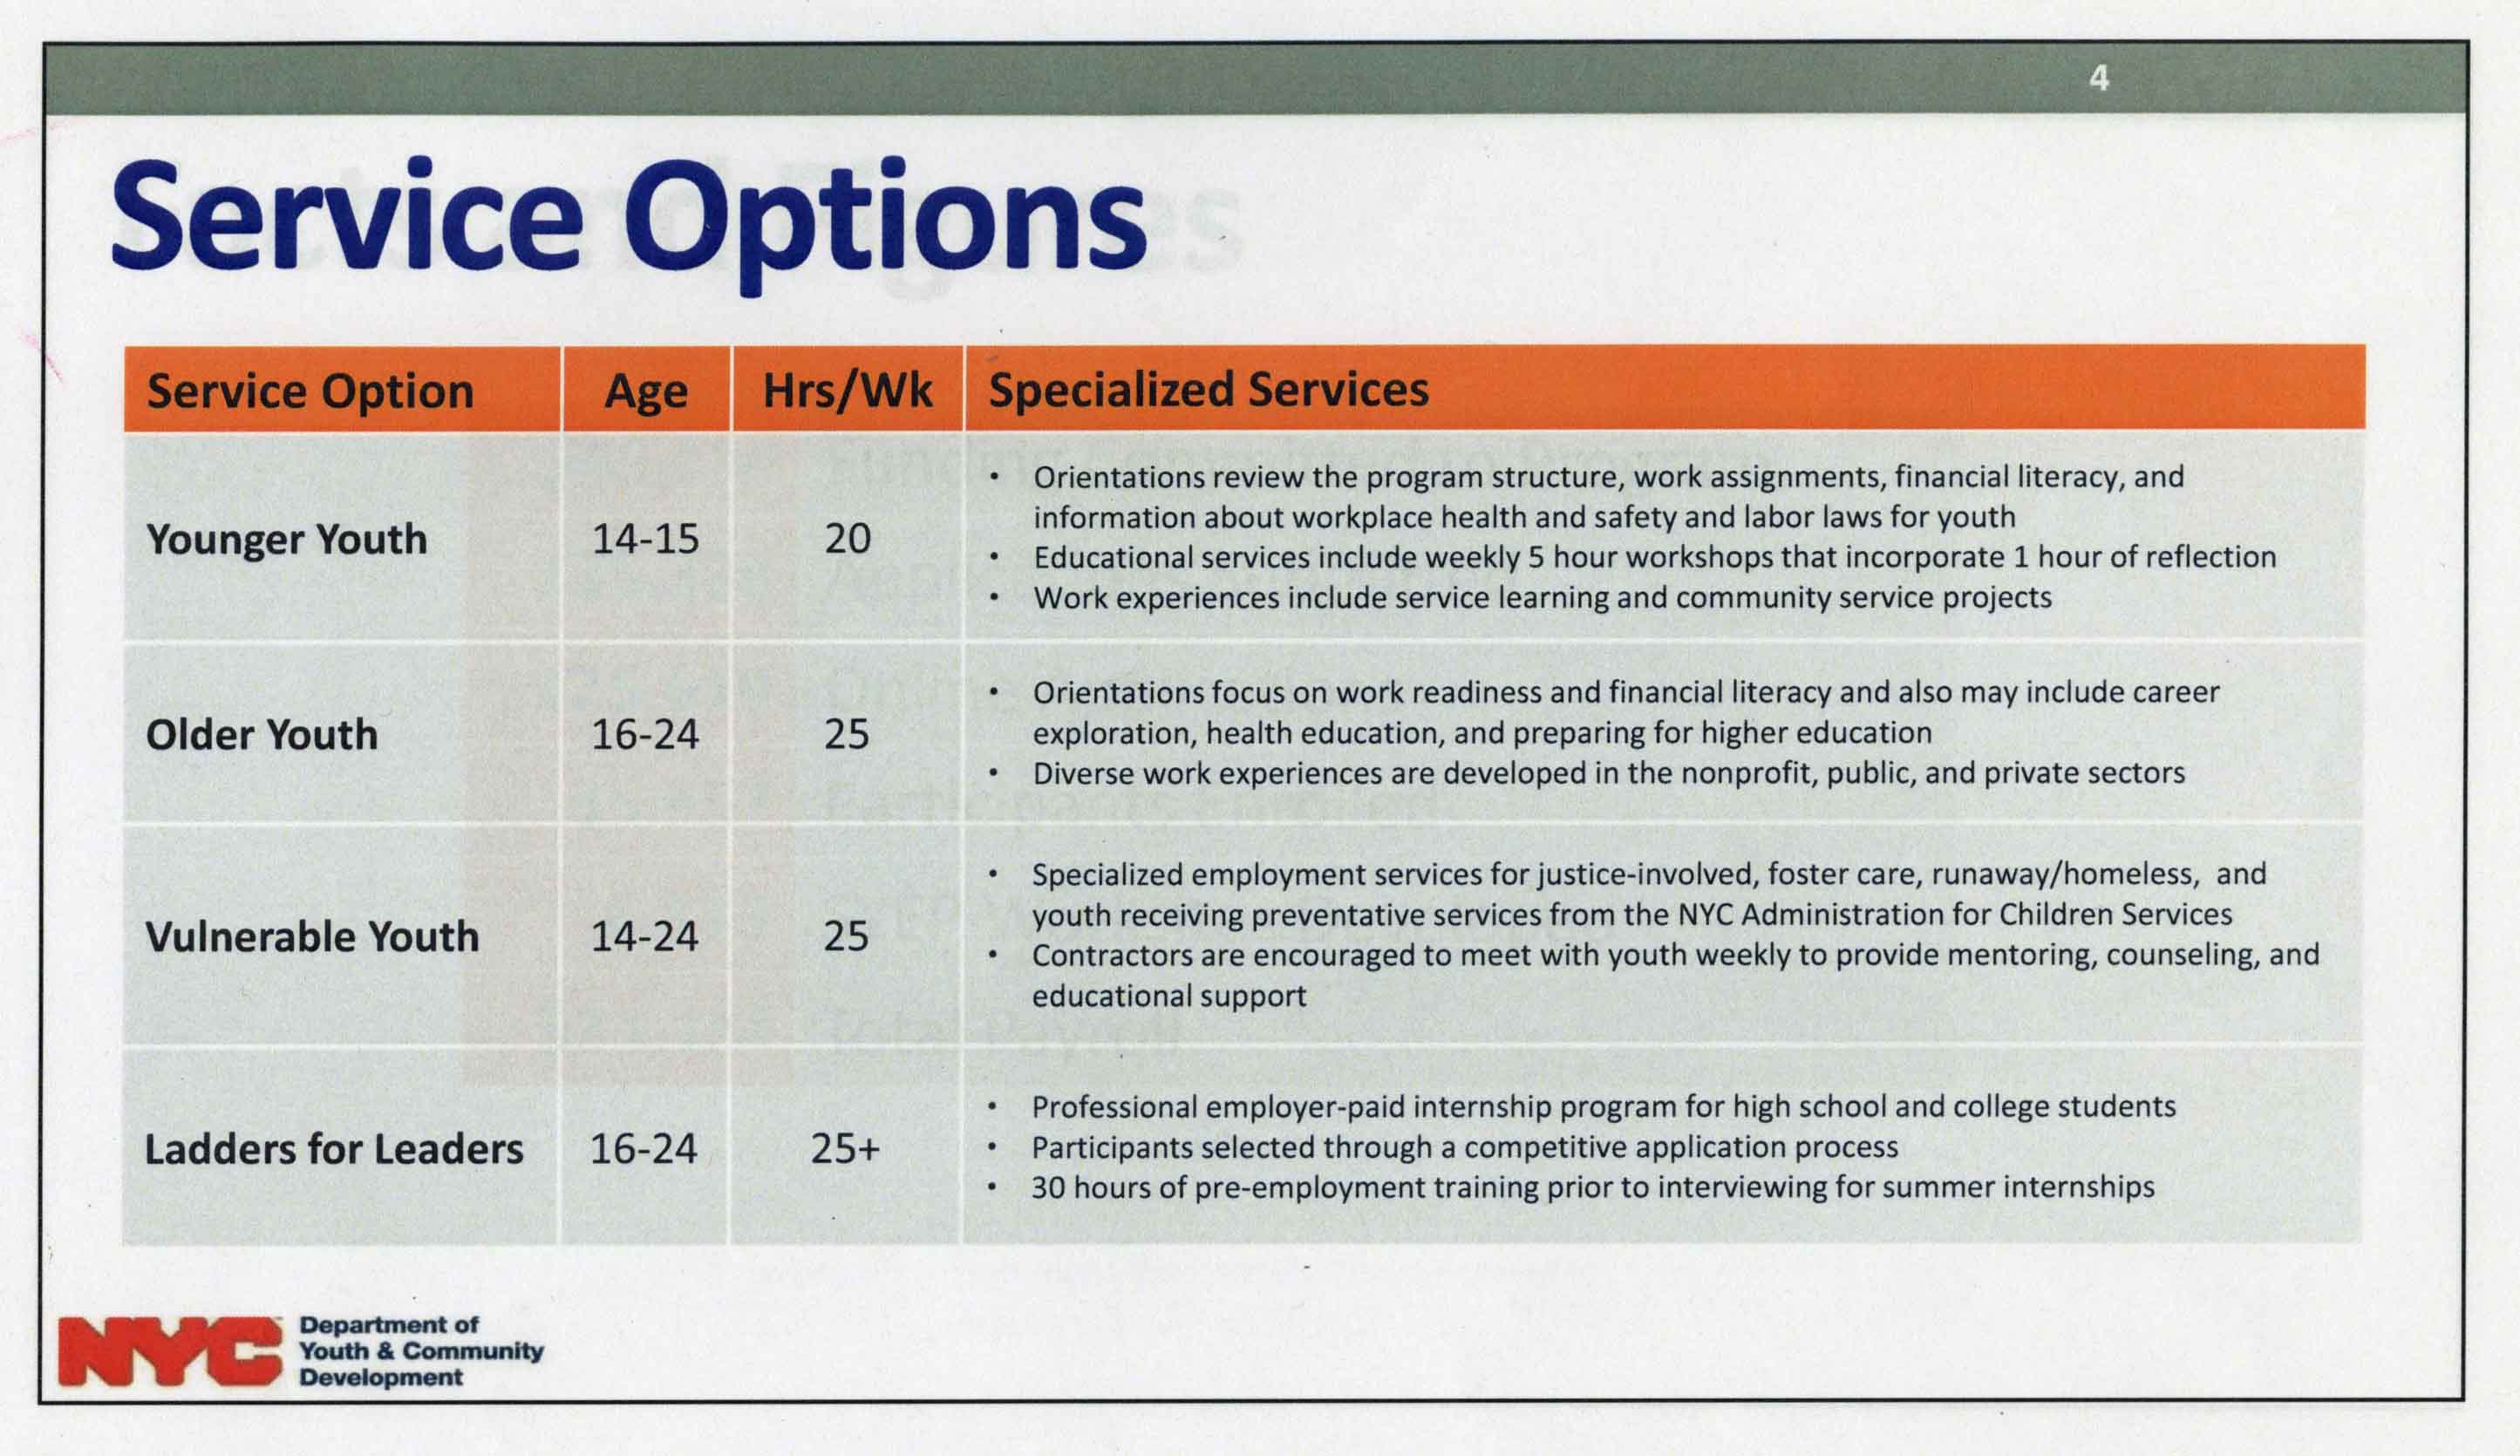 Color chart of service options by age group.